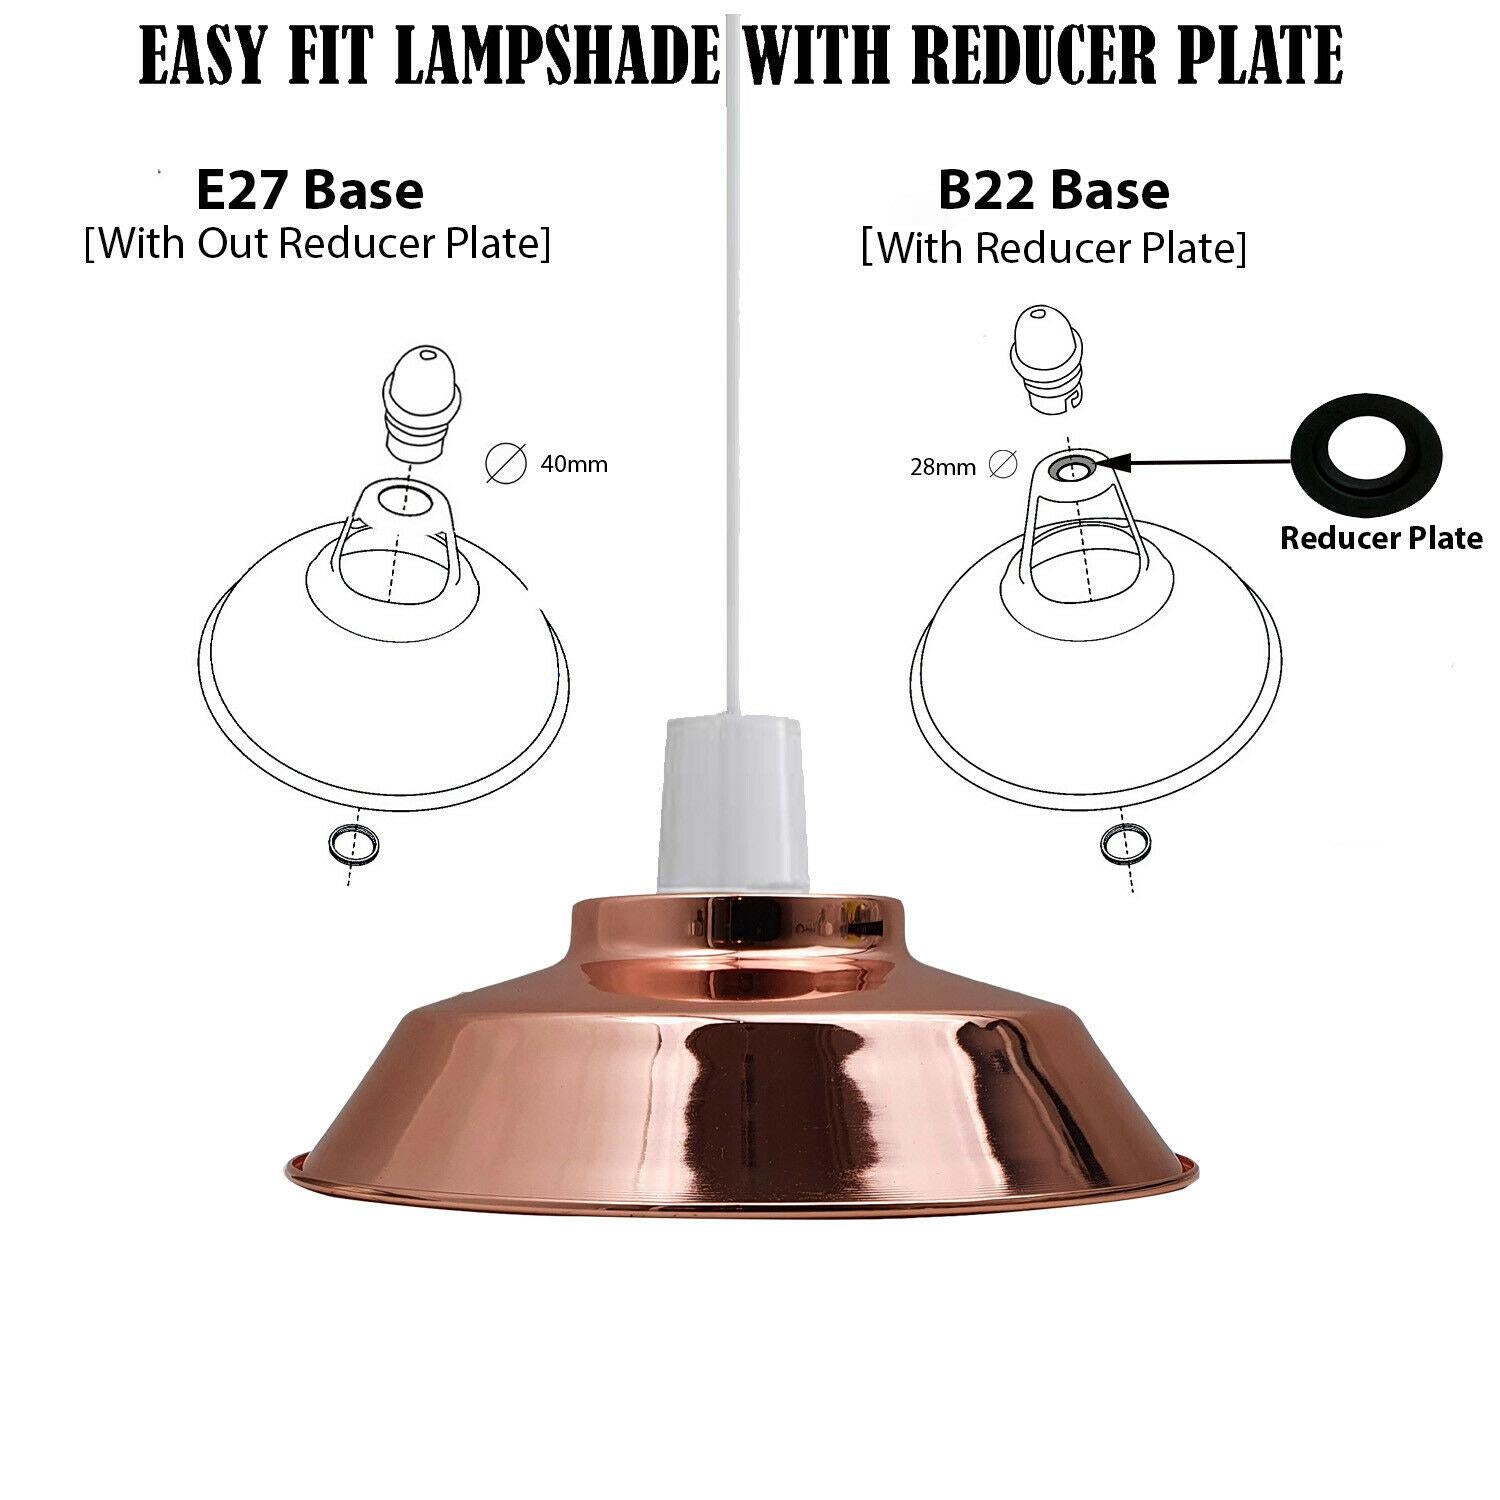 Lamp shade with reducer plate